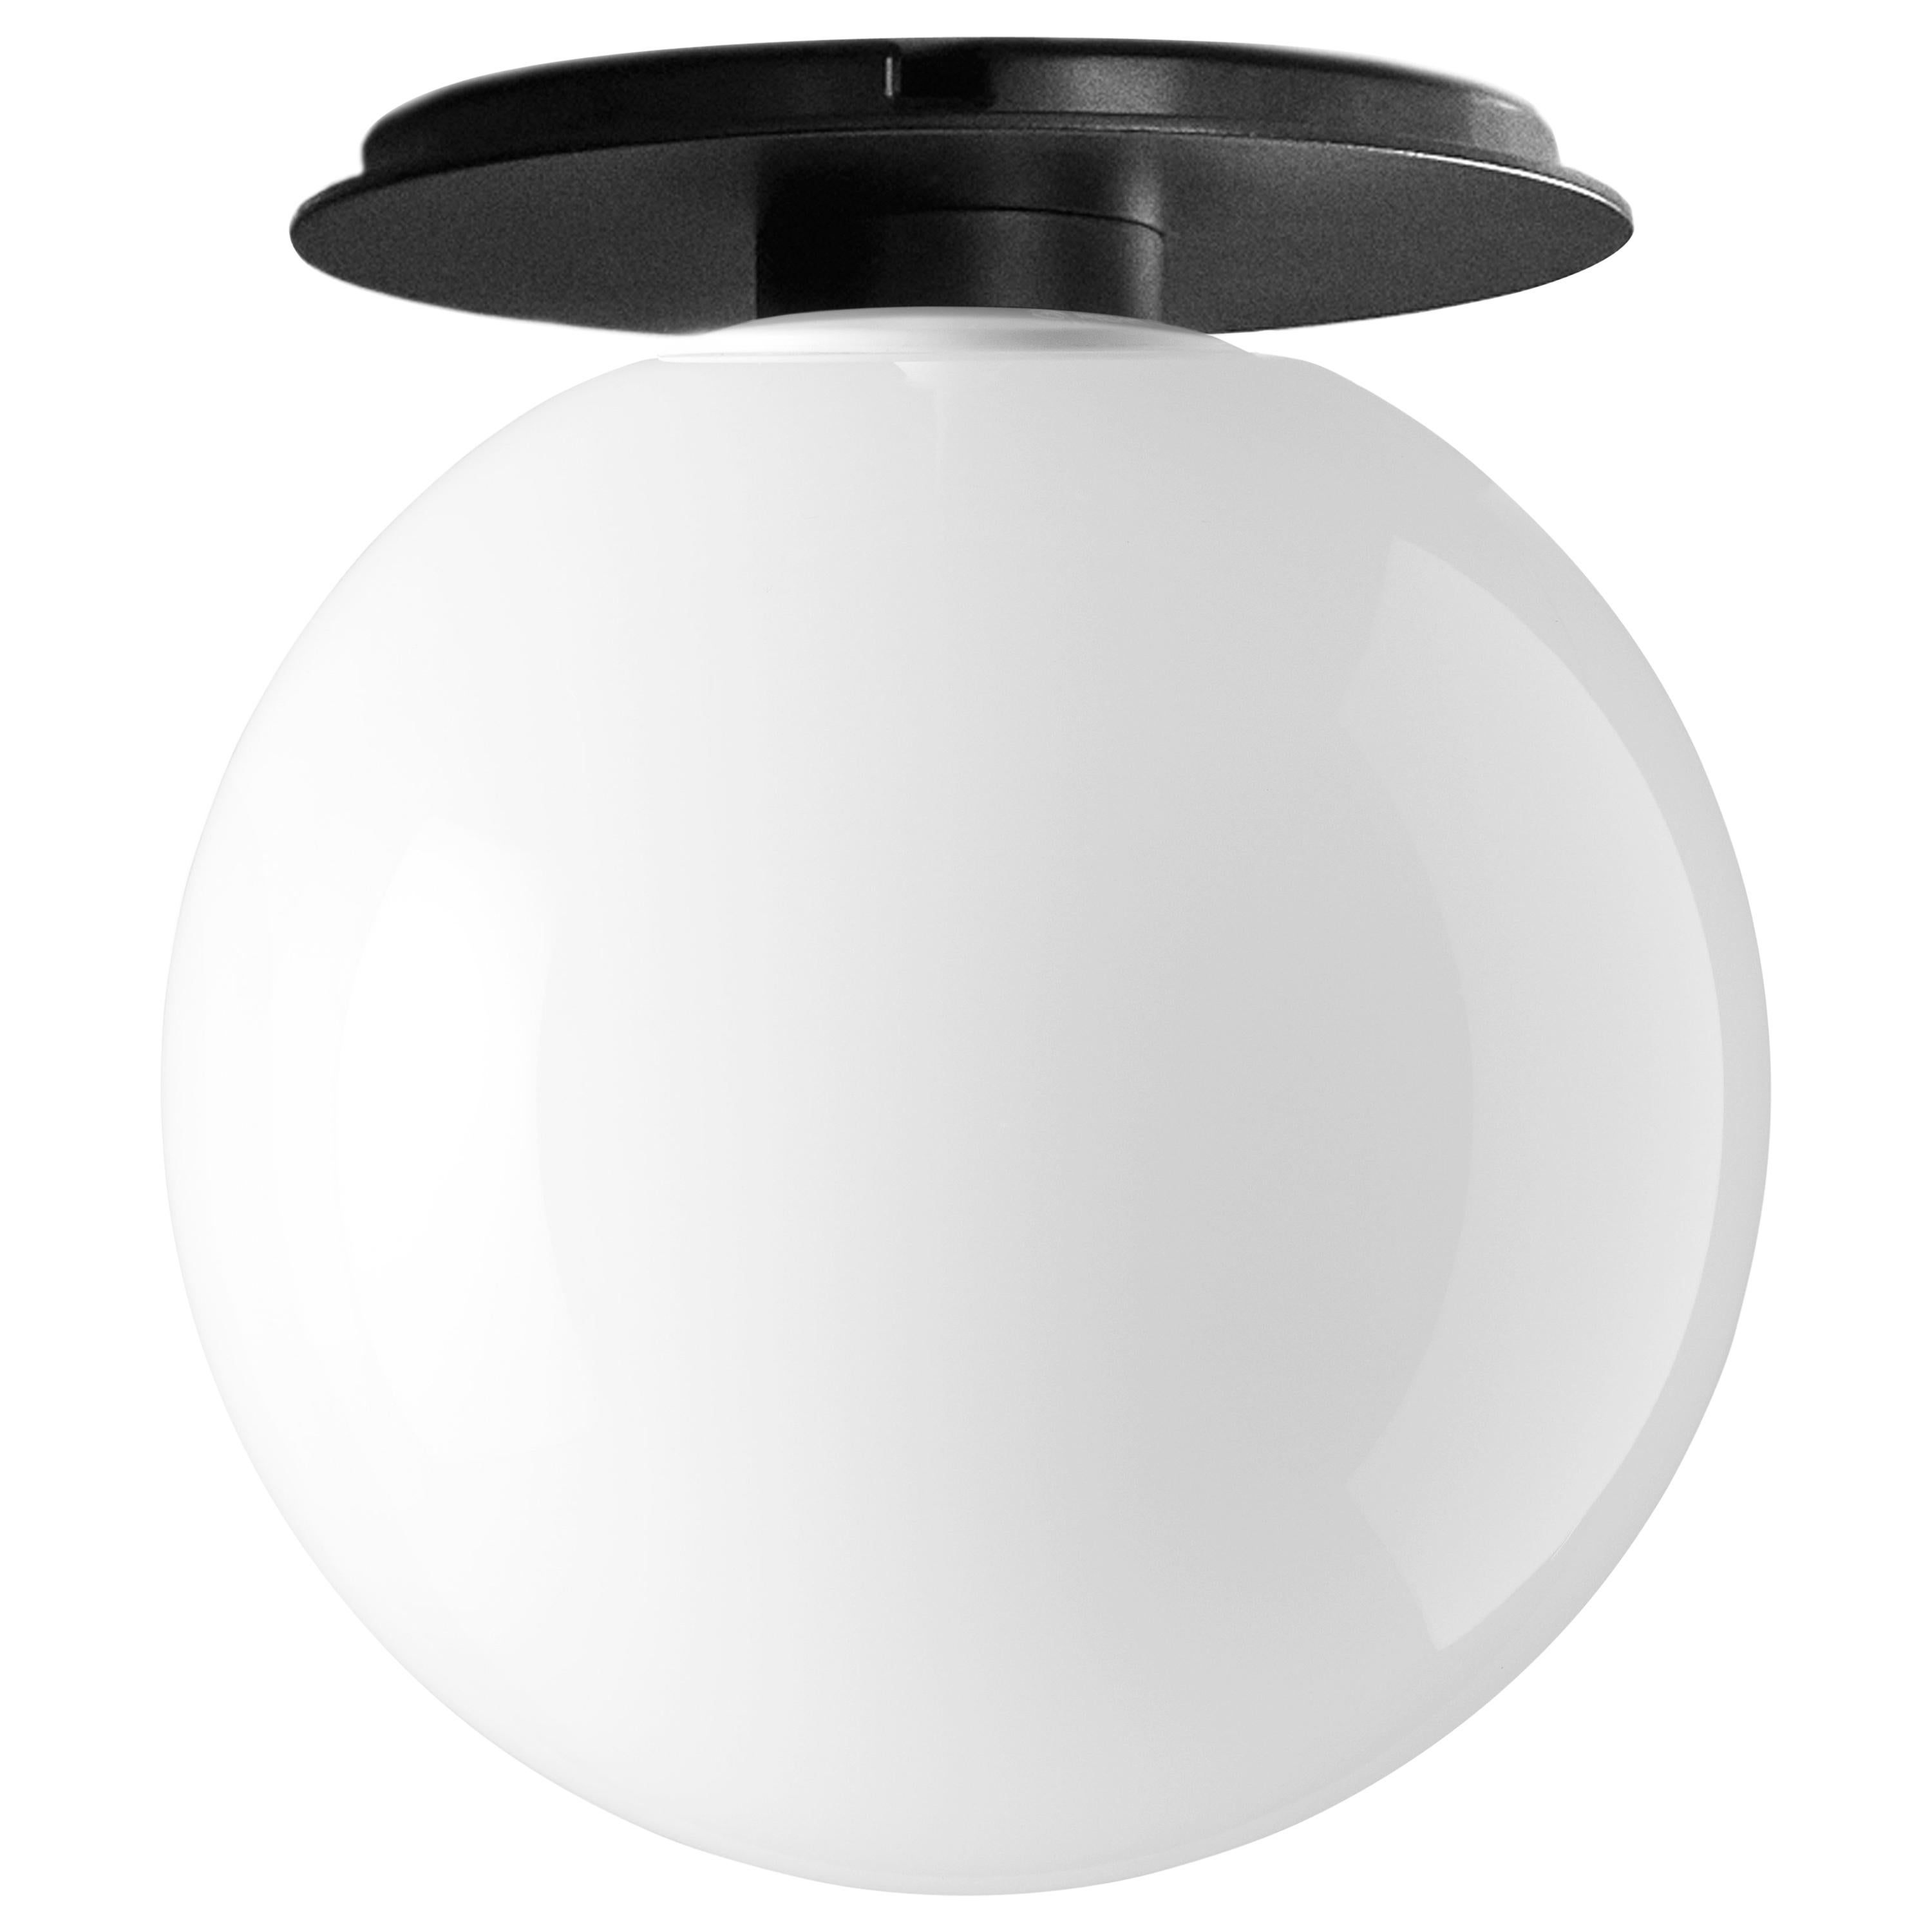 TR Bulb, Ceiling or Wall Lamp, Black, Shiny Opal For Sale